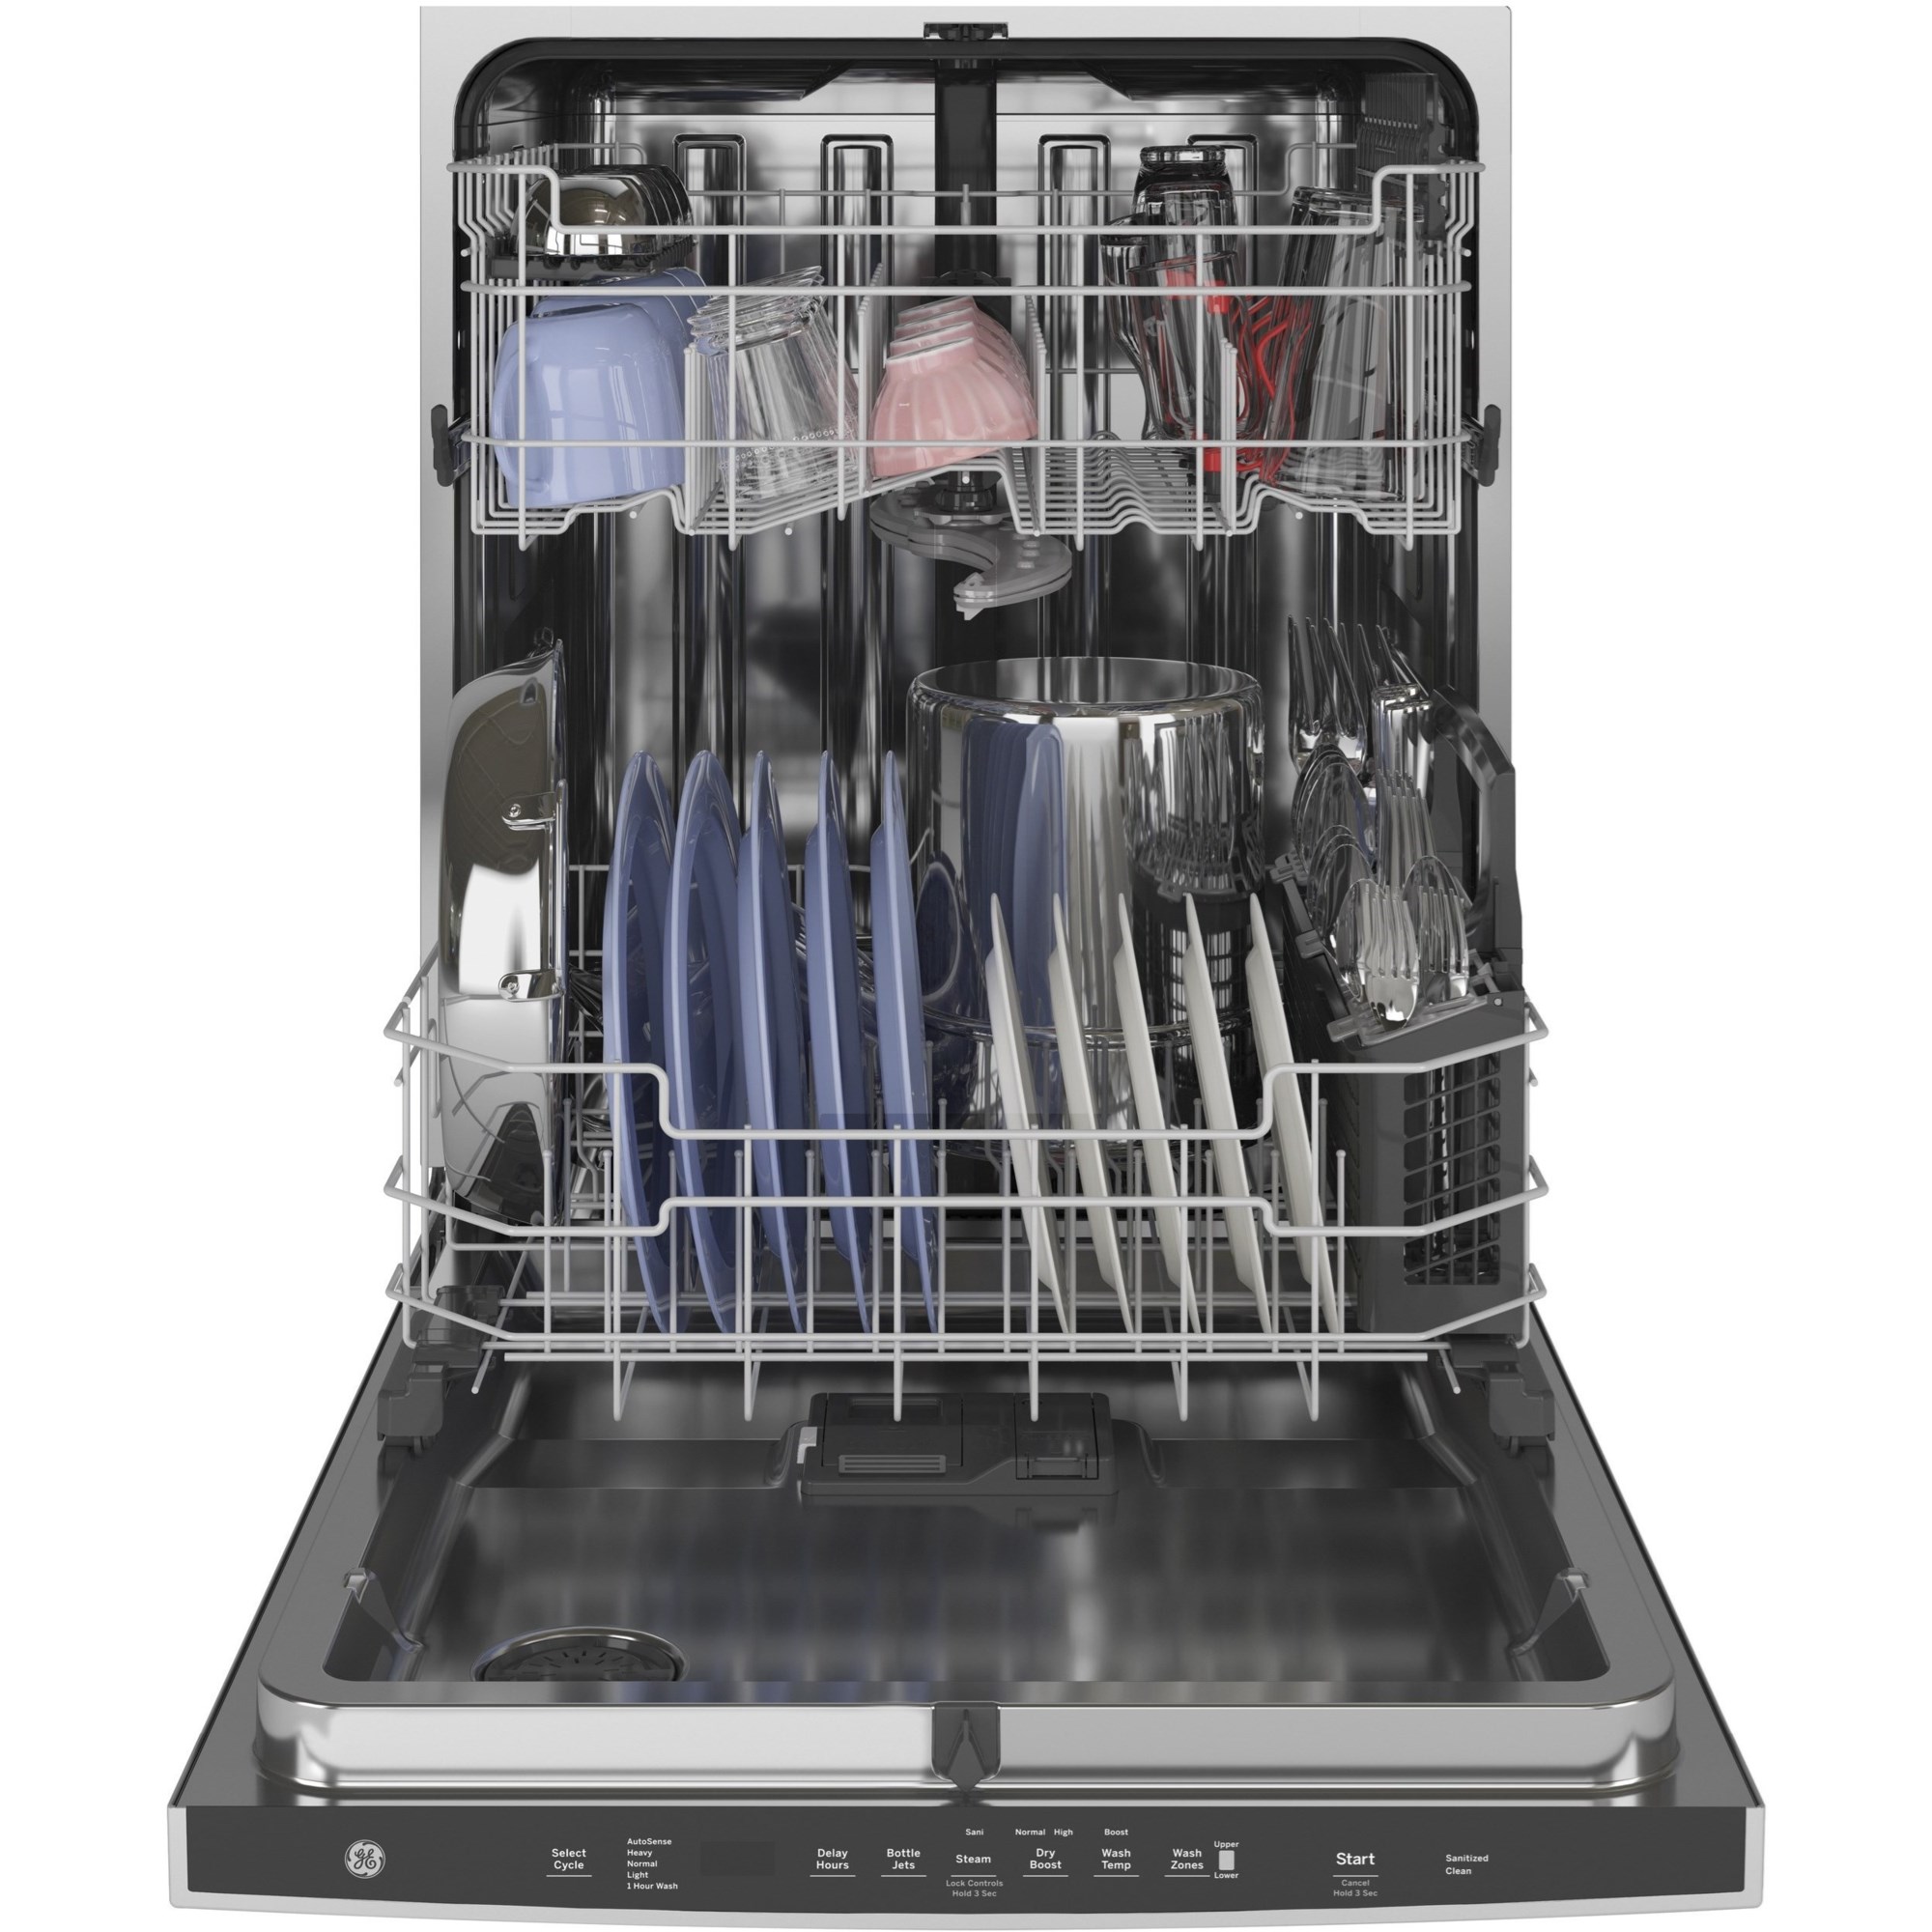 GE Appliances 24 Double Drawer Dishwasher in Stainless Steel